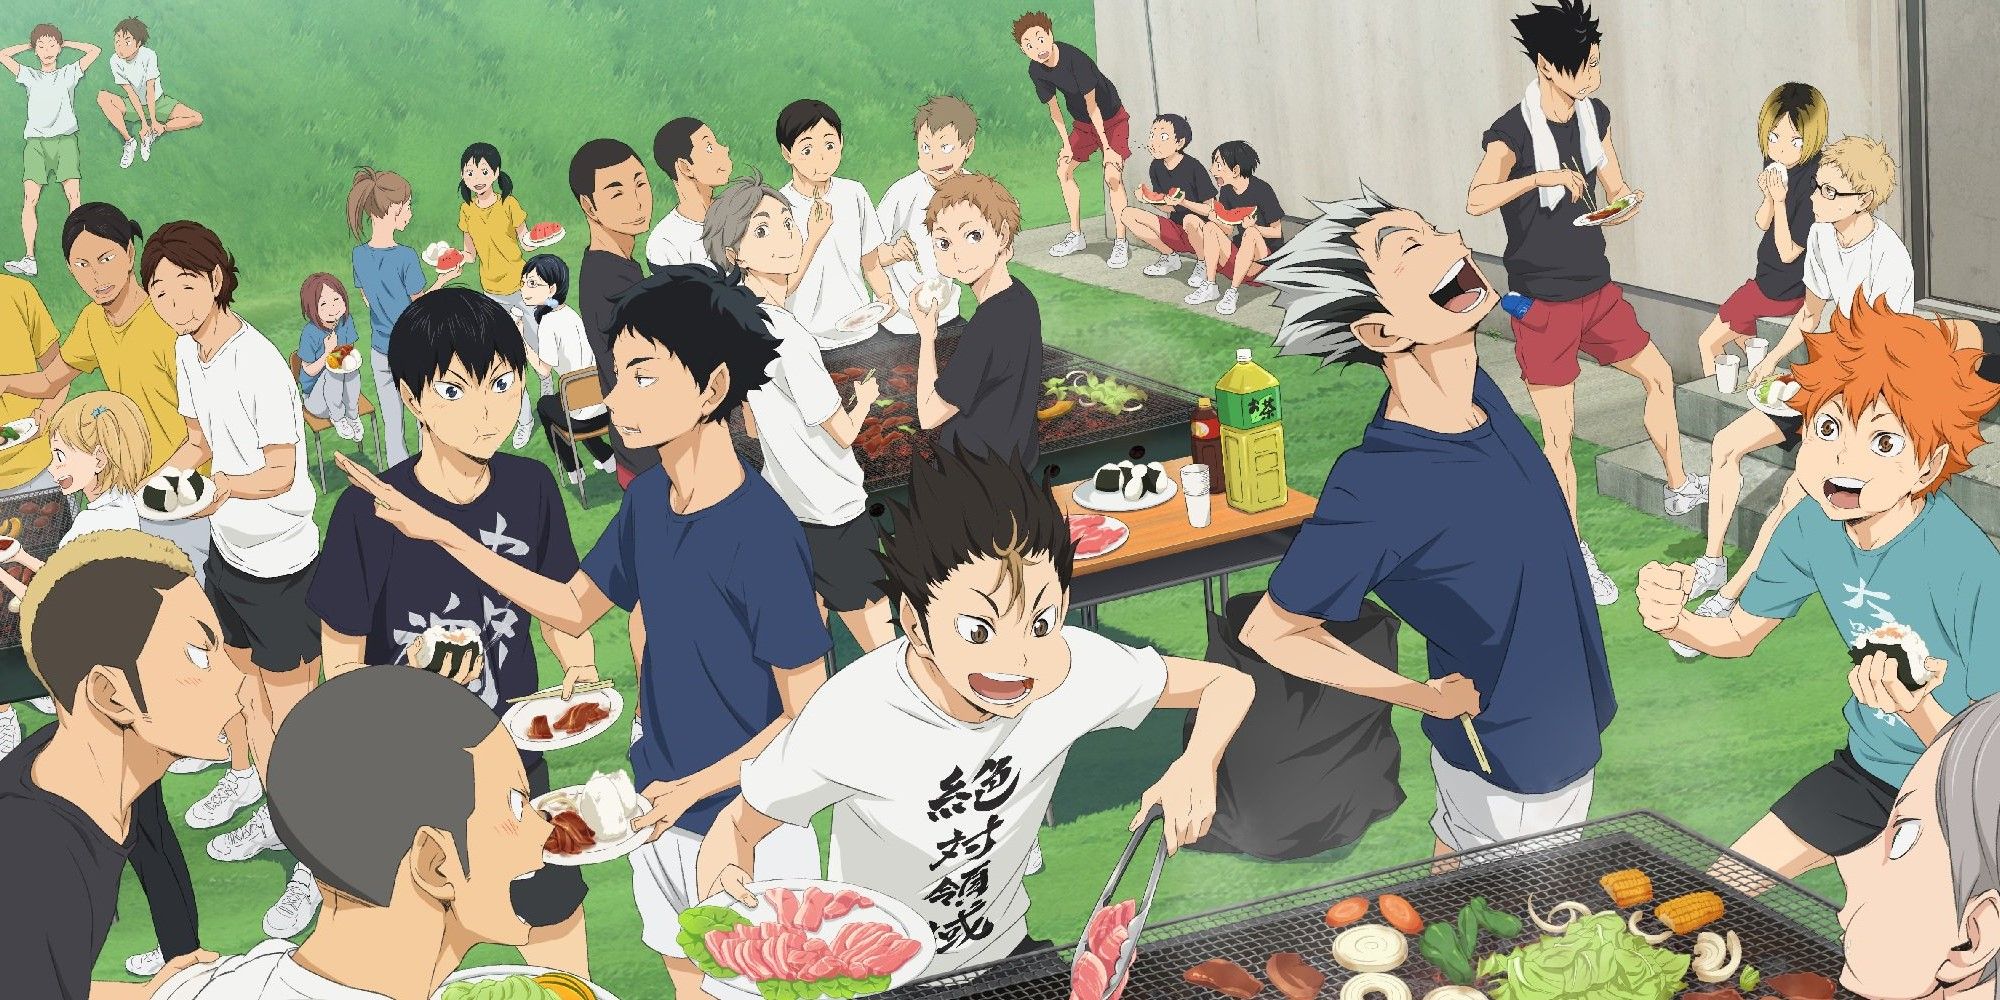 Shoyo and friends eat at a barbecue training camp in Haikyu!!